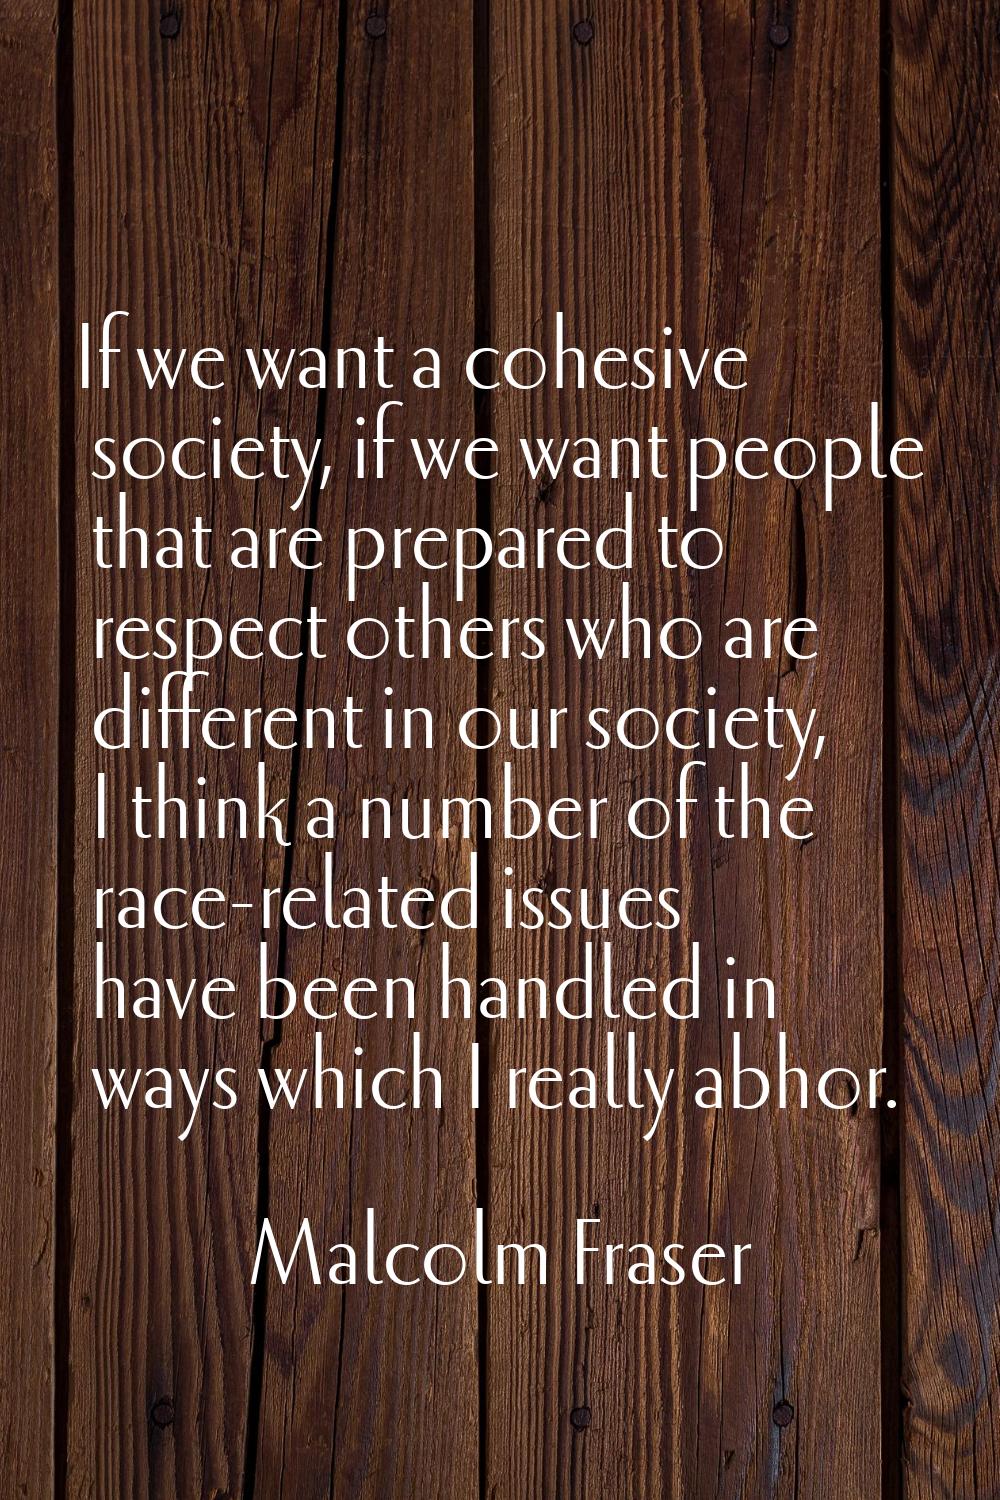 If we want a cohesive society, if we want people that are prepared to respect others who are differ